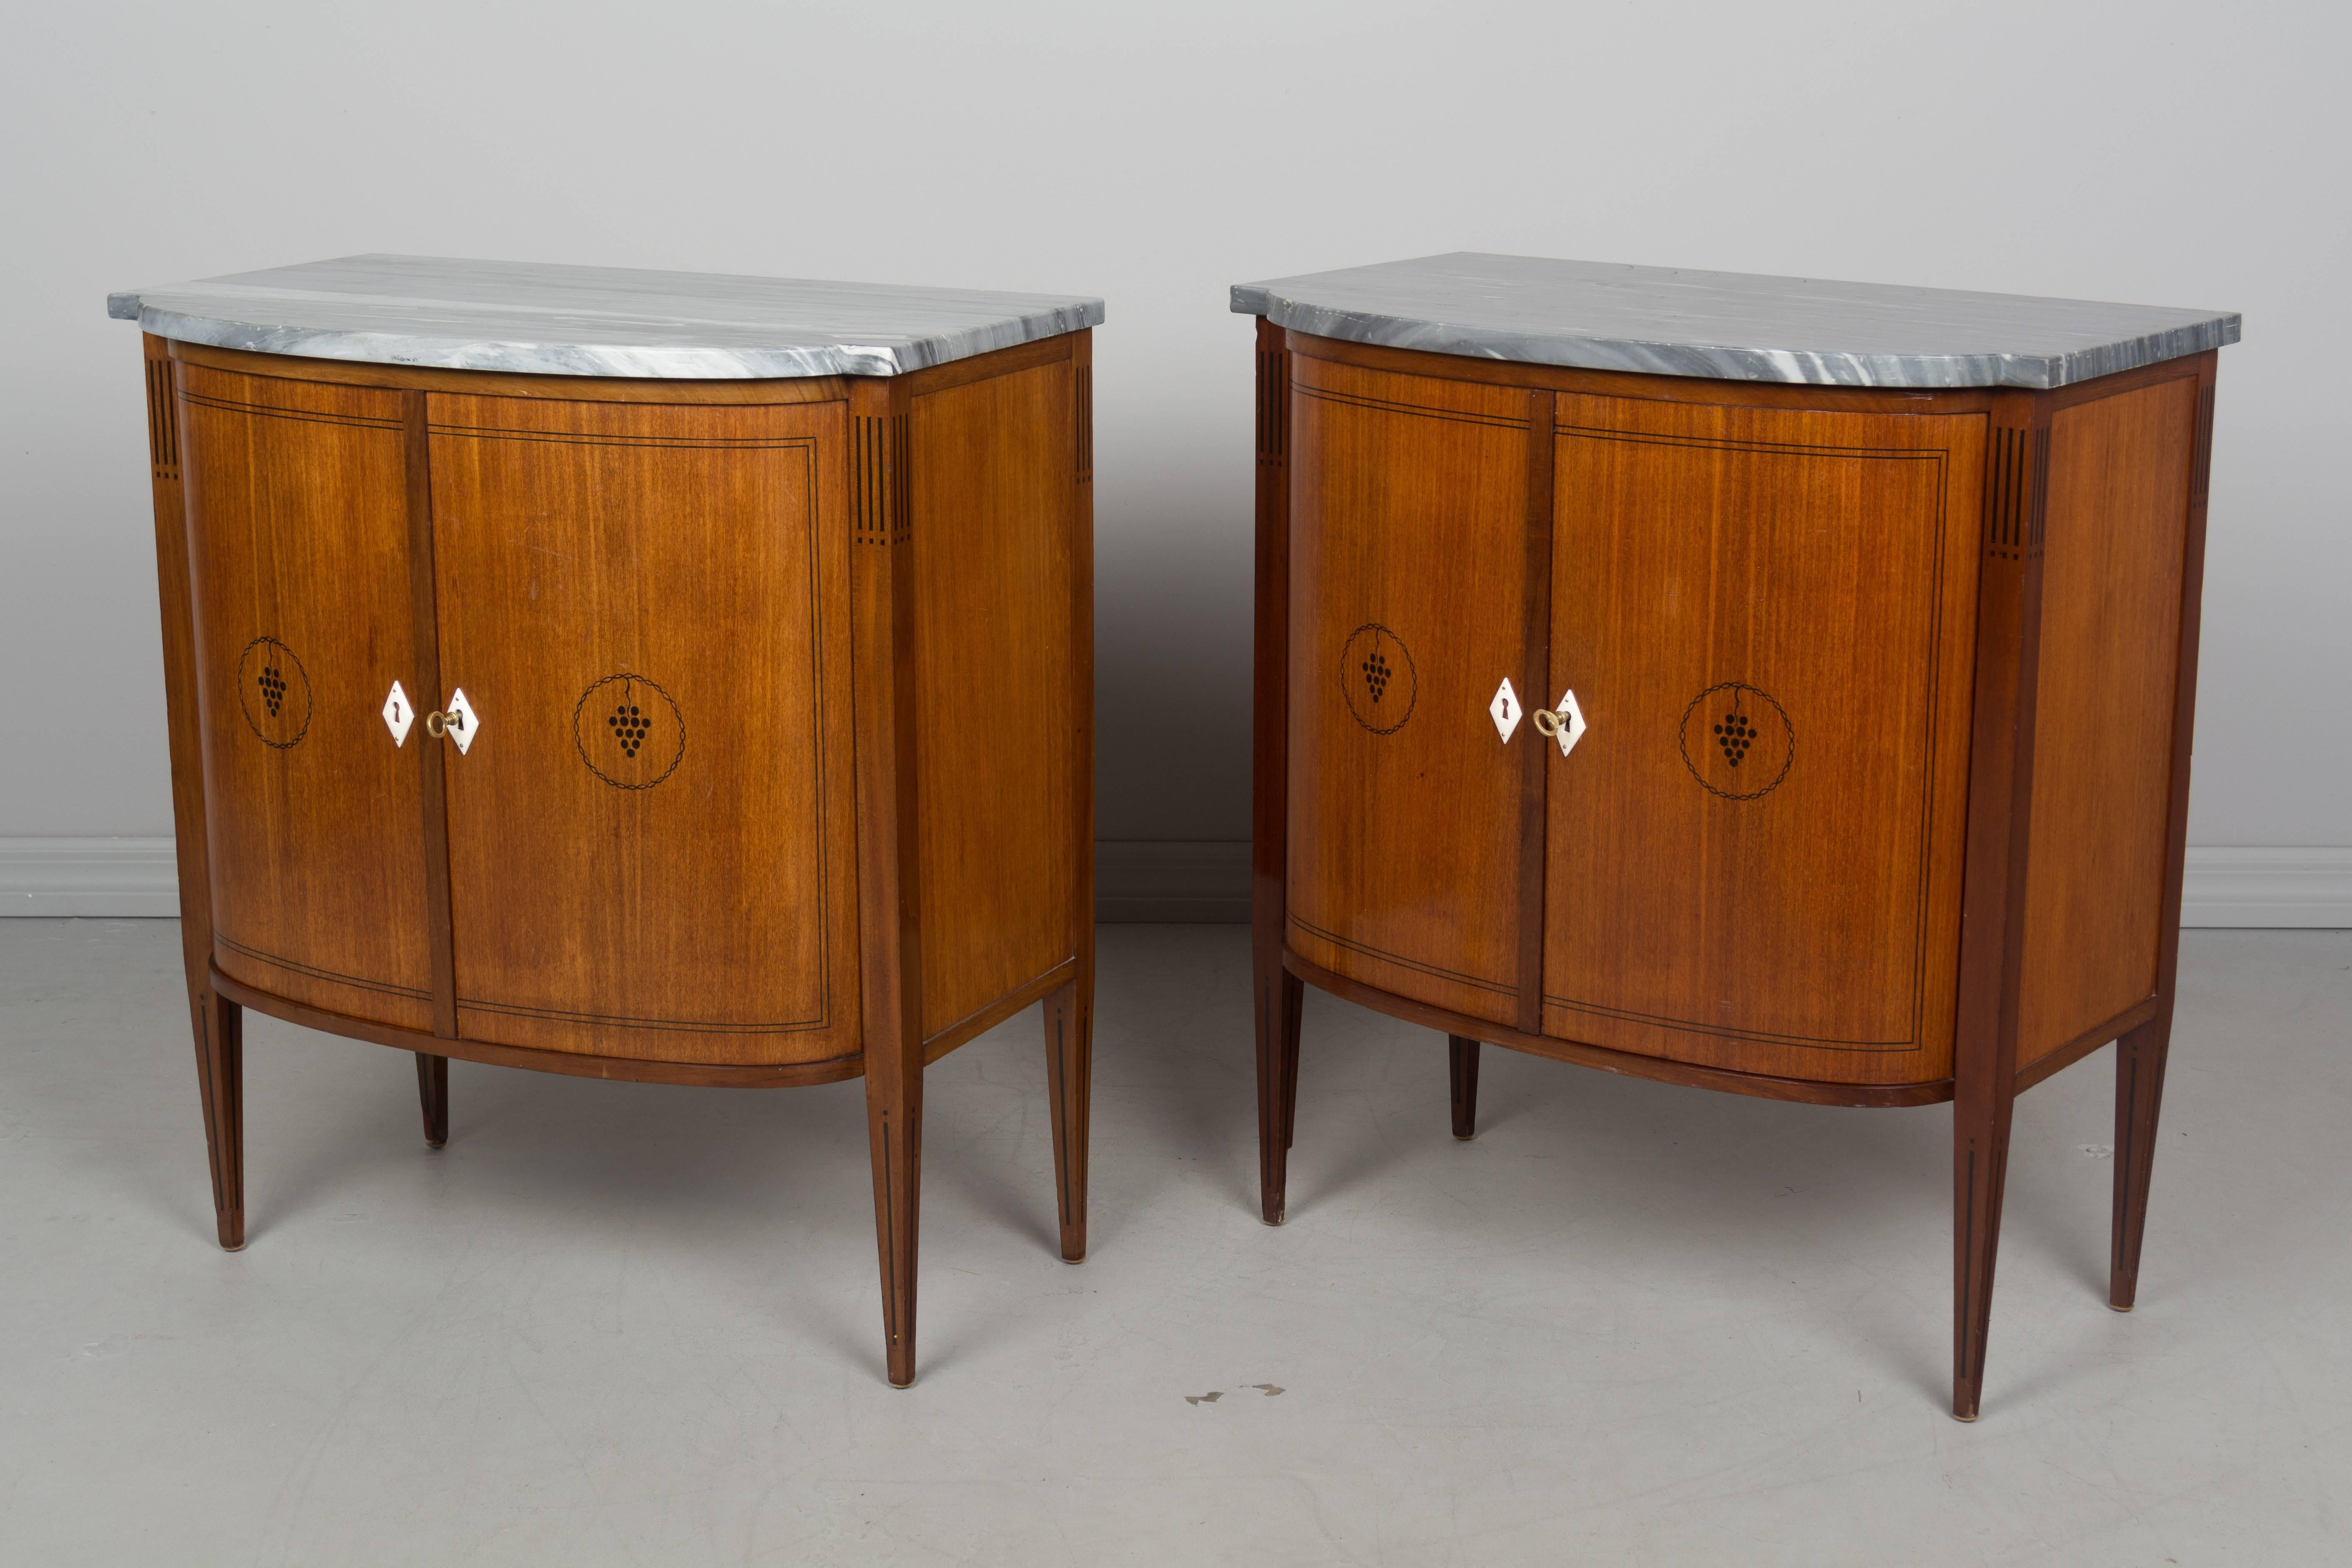 A pair of French Art Deco style cabinets, or side tables, made by Maison Krieger. Stamped below marble, circa 1940-1950s. Made of mahogany with curved front doors and original marble tops. Working locks and keys. Opening to one shelf. Very high